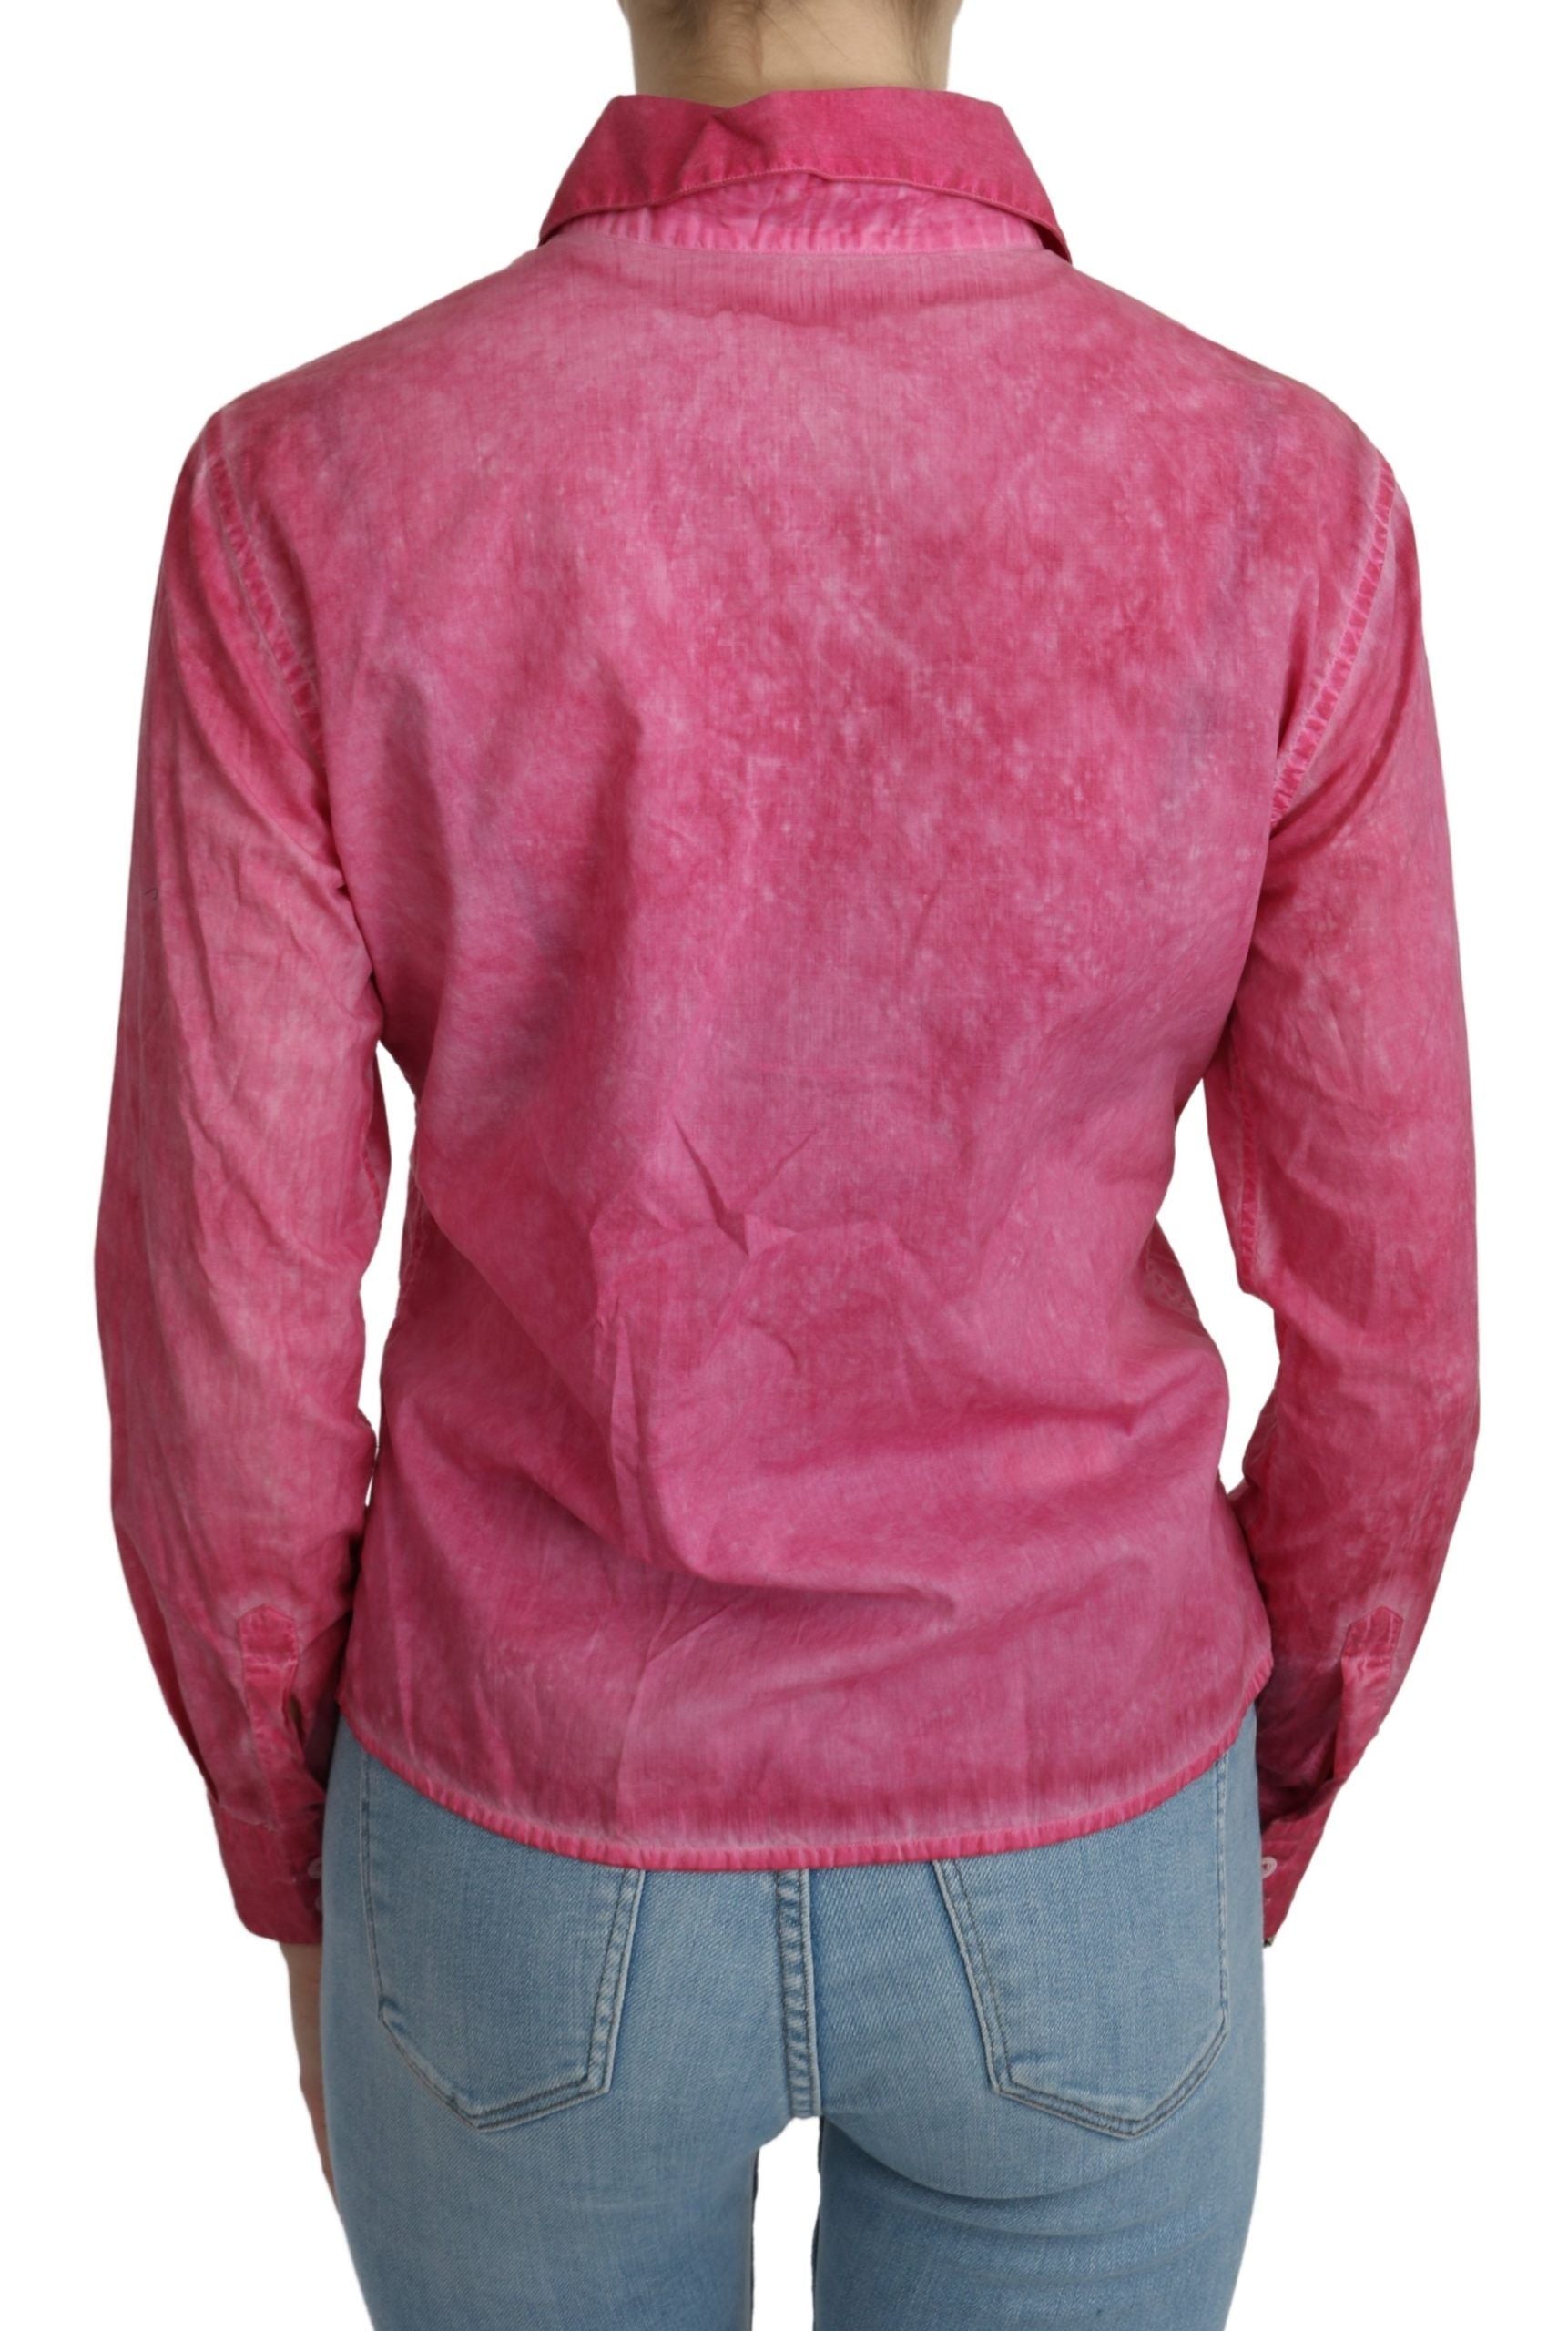 Ermanno Scervino Pink Collared Long Sleeve Shirt Blouse Top